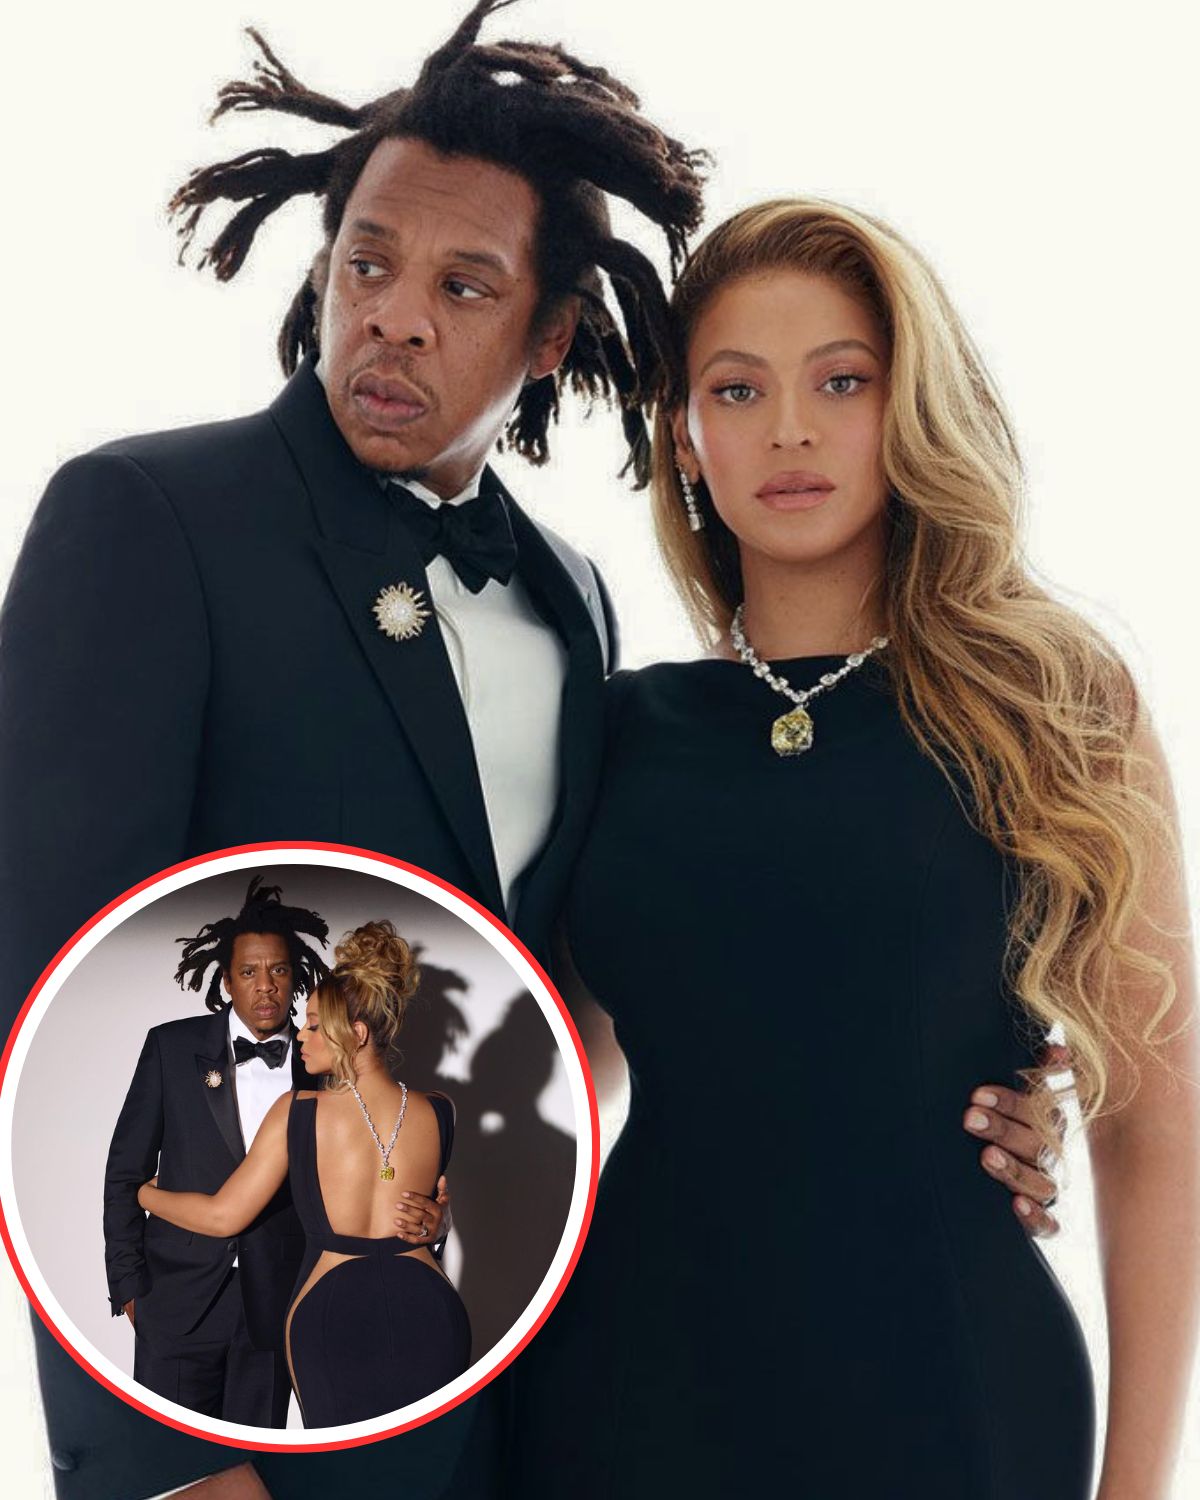 Cover Image for Beyoncé wears $30M yellow stone necklace for Tiffany campaign with Jay-Z AGAIN – despite saying she was ‘angry and disappointed’ to find out it was a BLOOD diamond